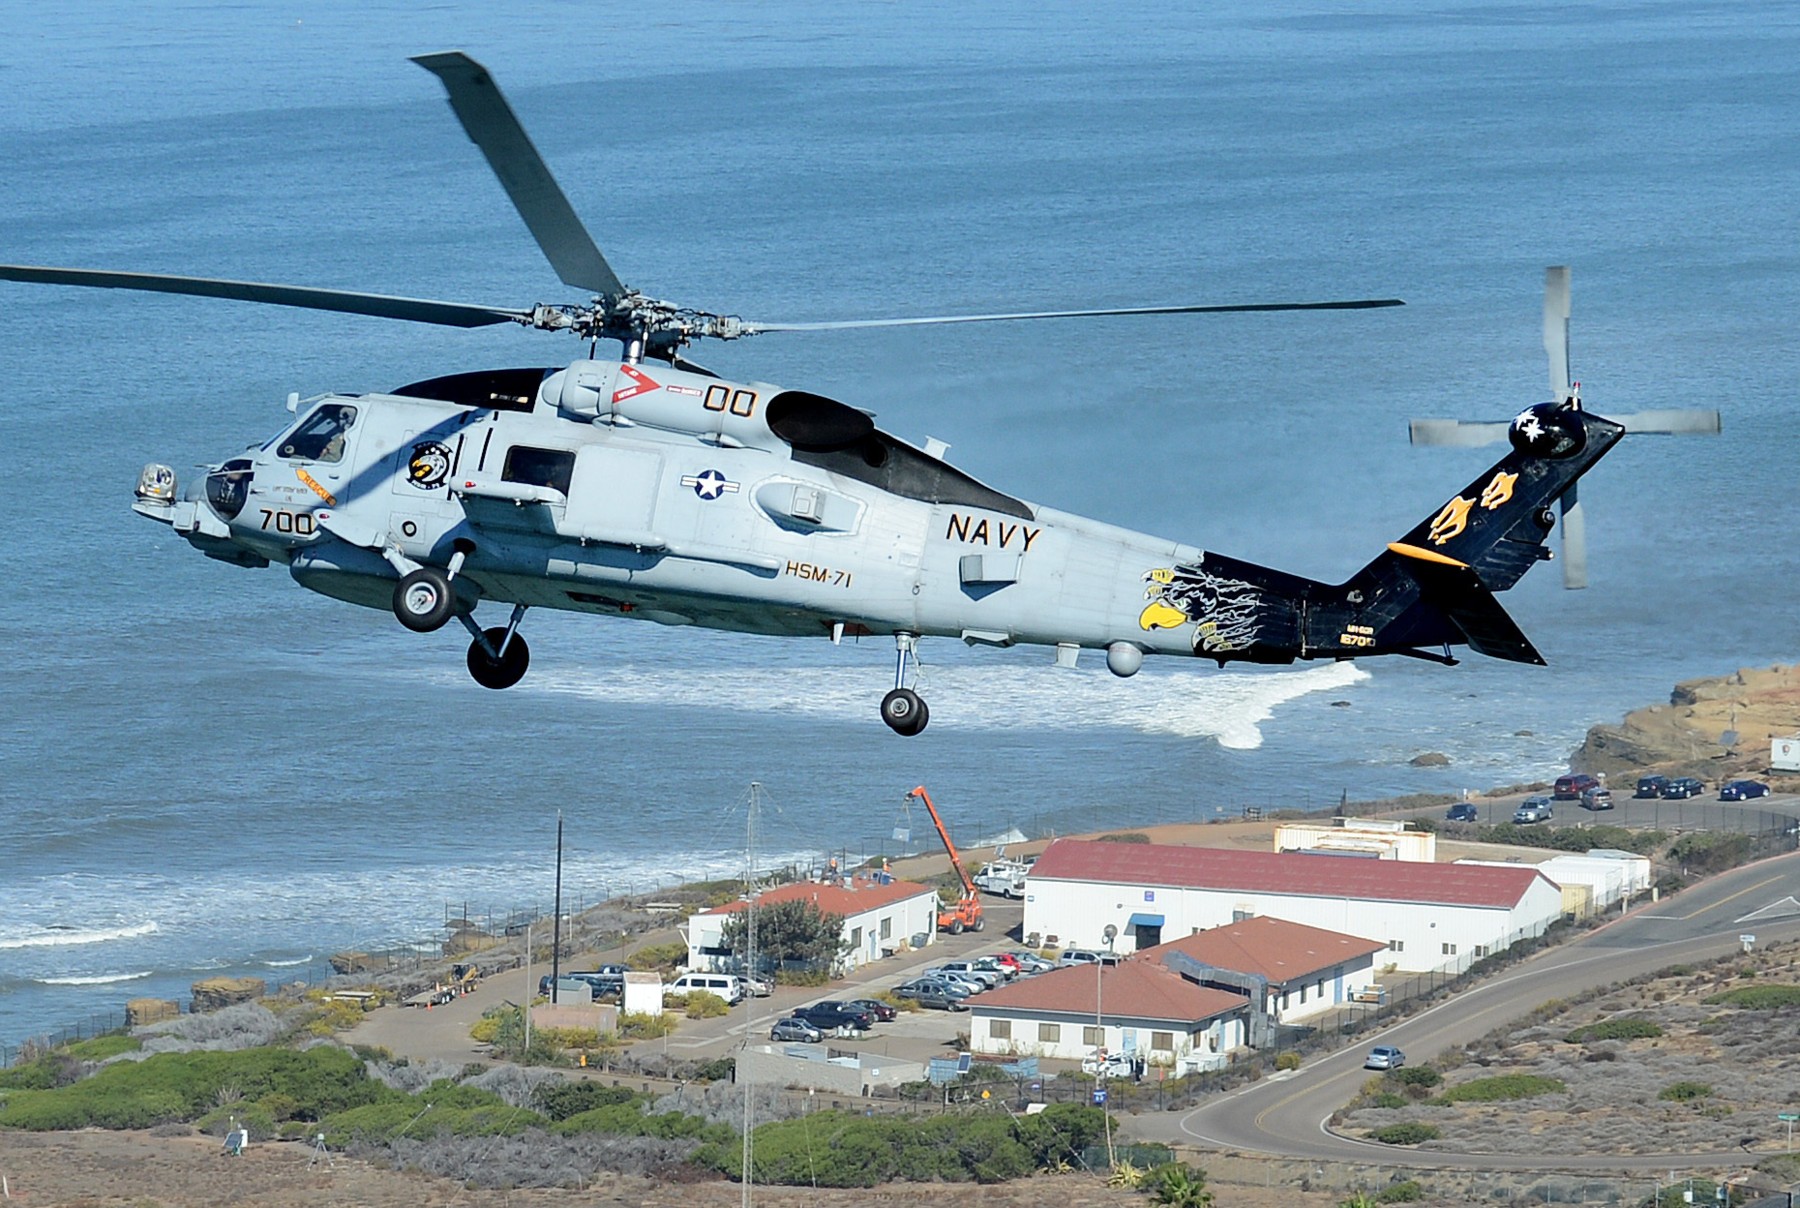 hsm-71 raptors helicopter maritime strike squadron mh-60r seahawk navy 2014 59